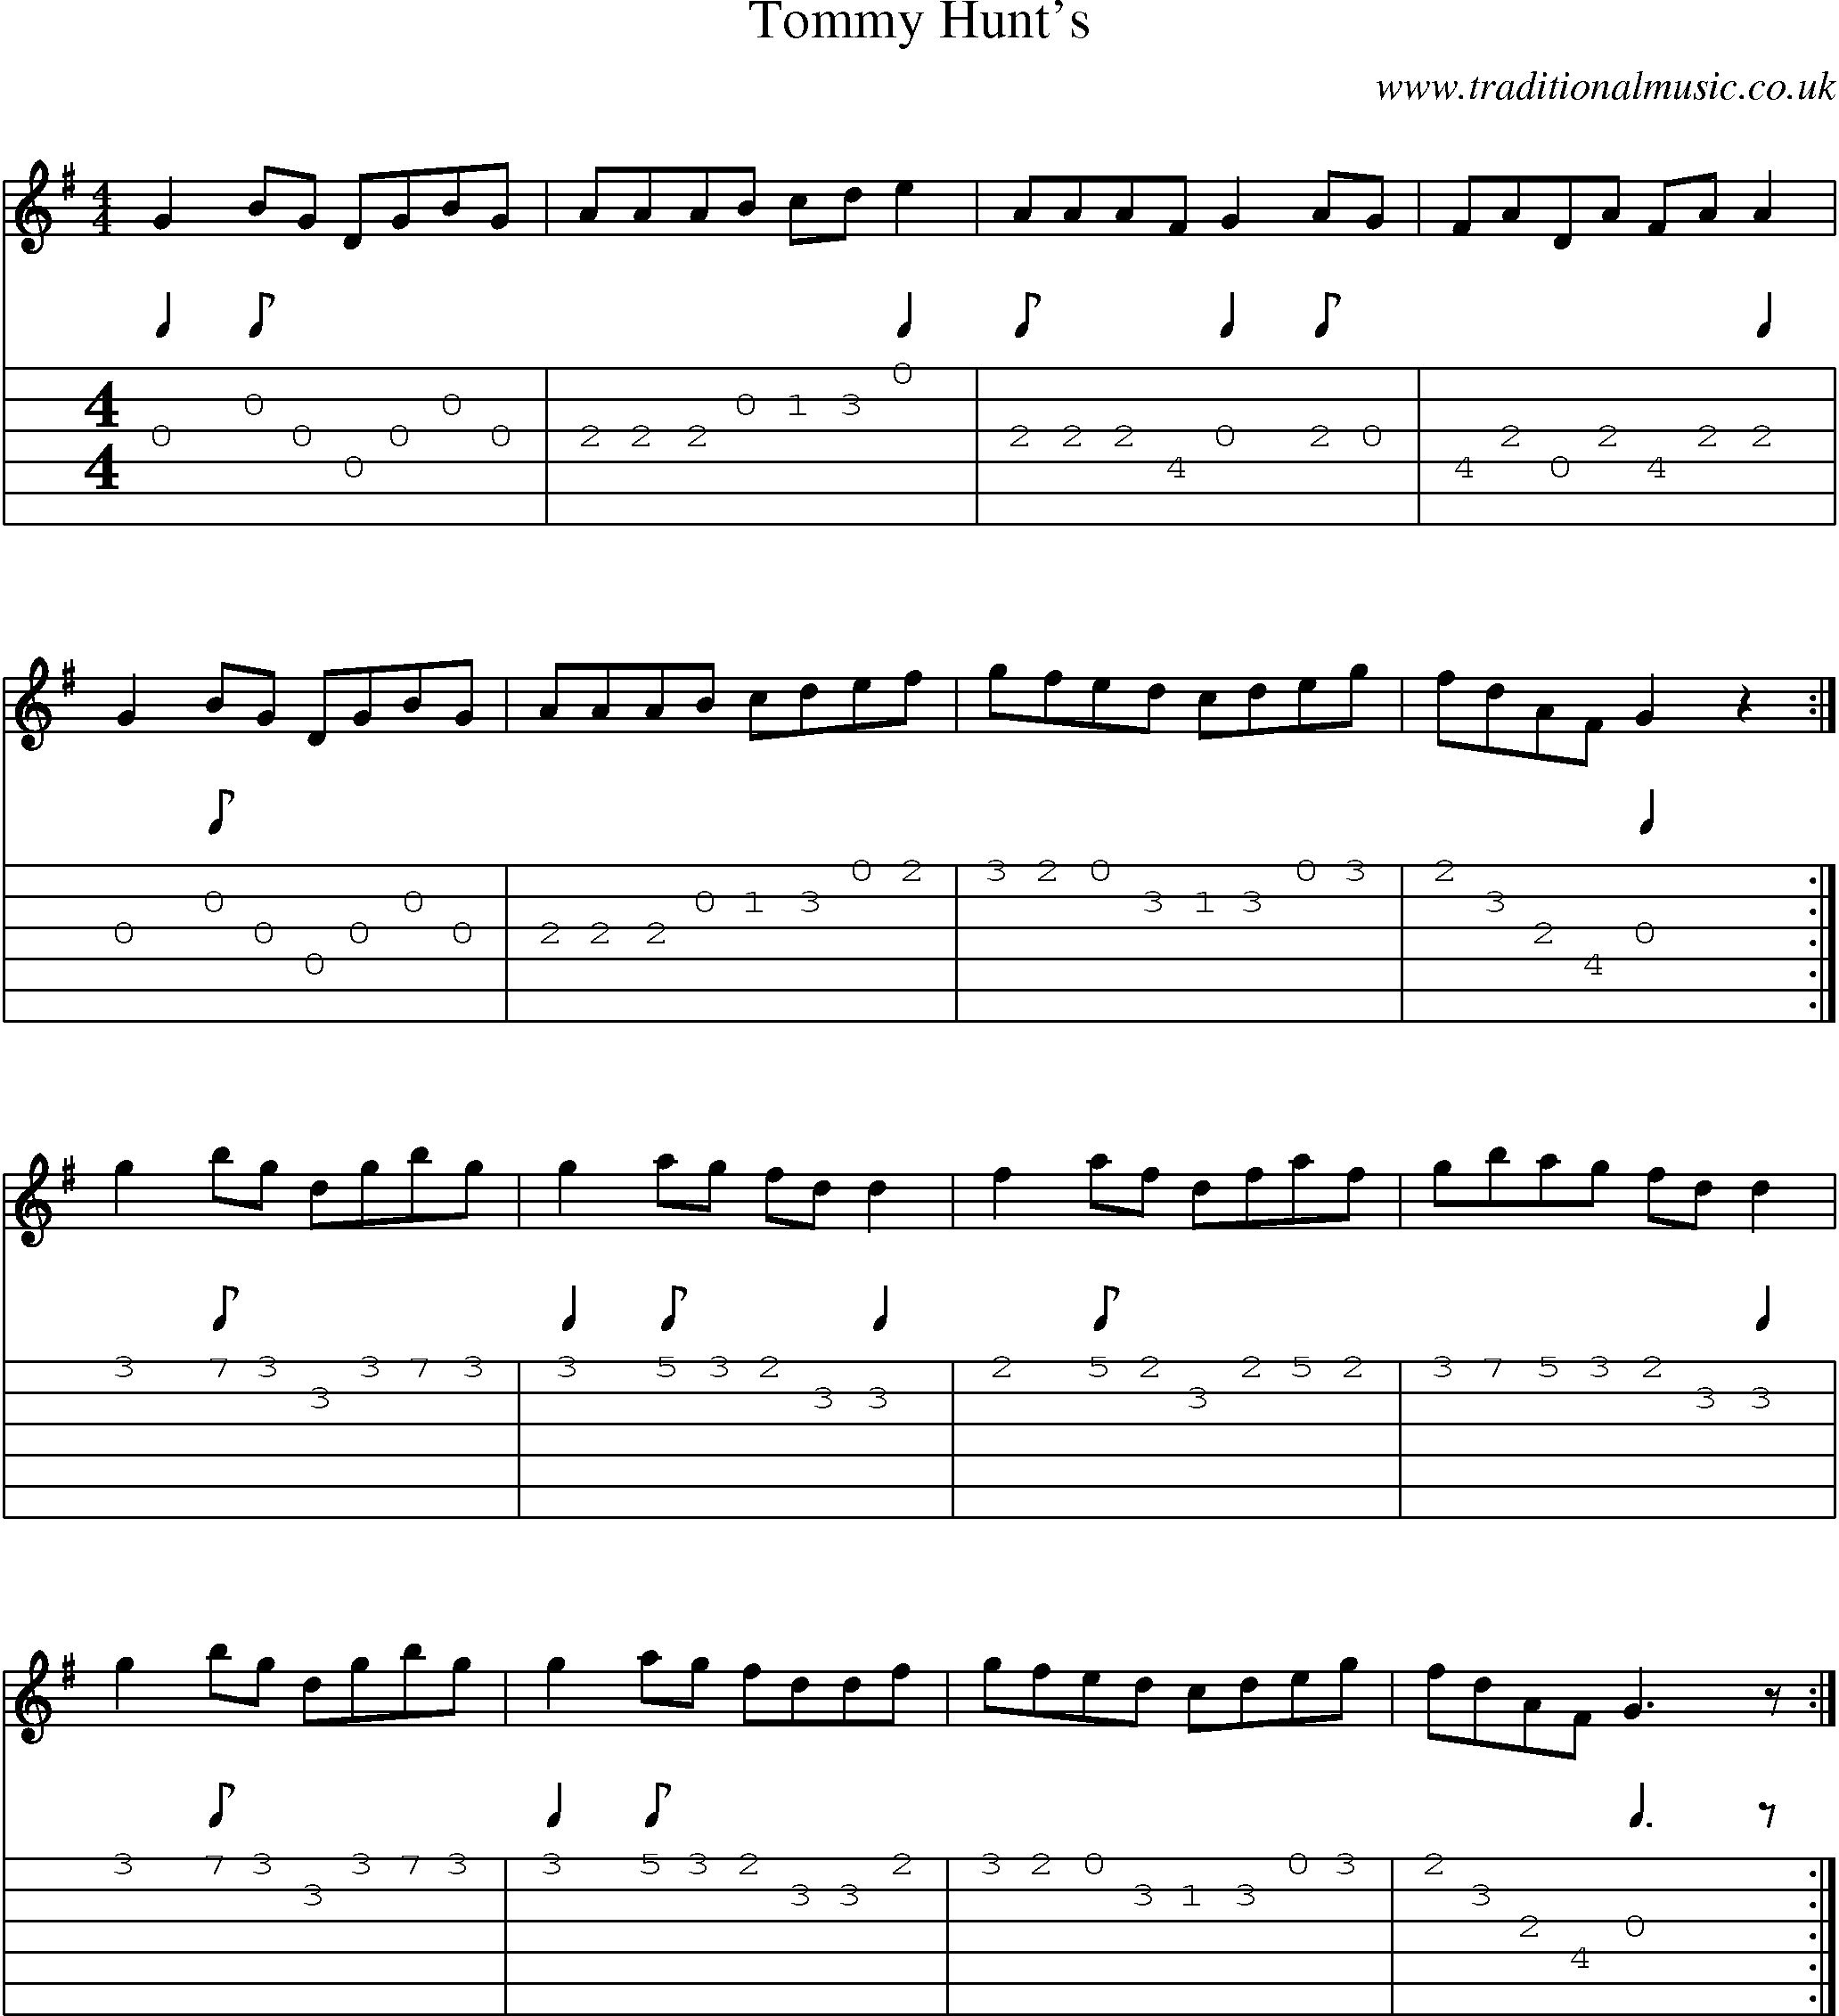 Music Score and Guitar Tabs for Tommy Hunts